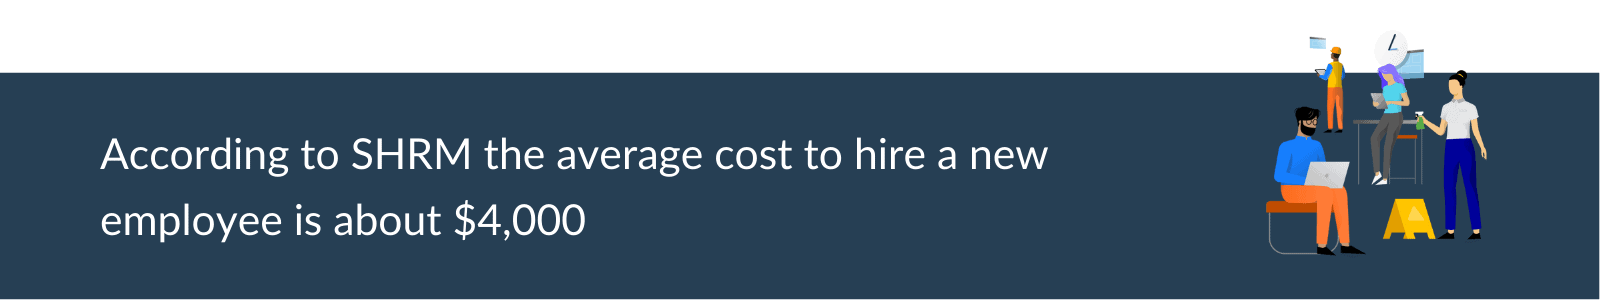 According to SHRM, the average cost to hire a new employee is about $4,000.